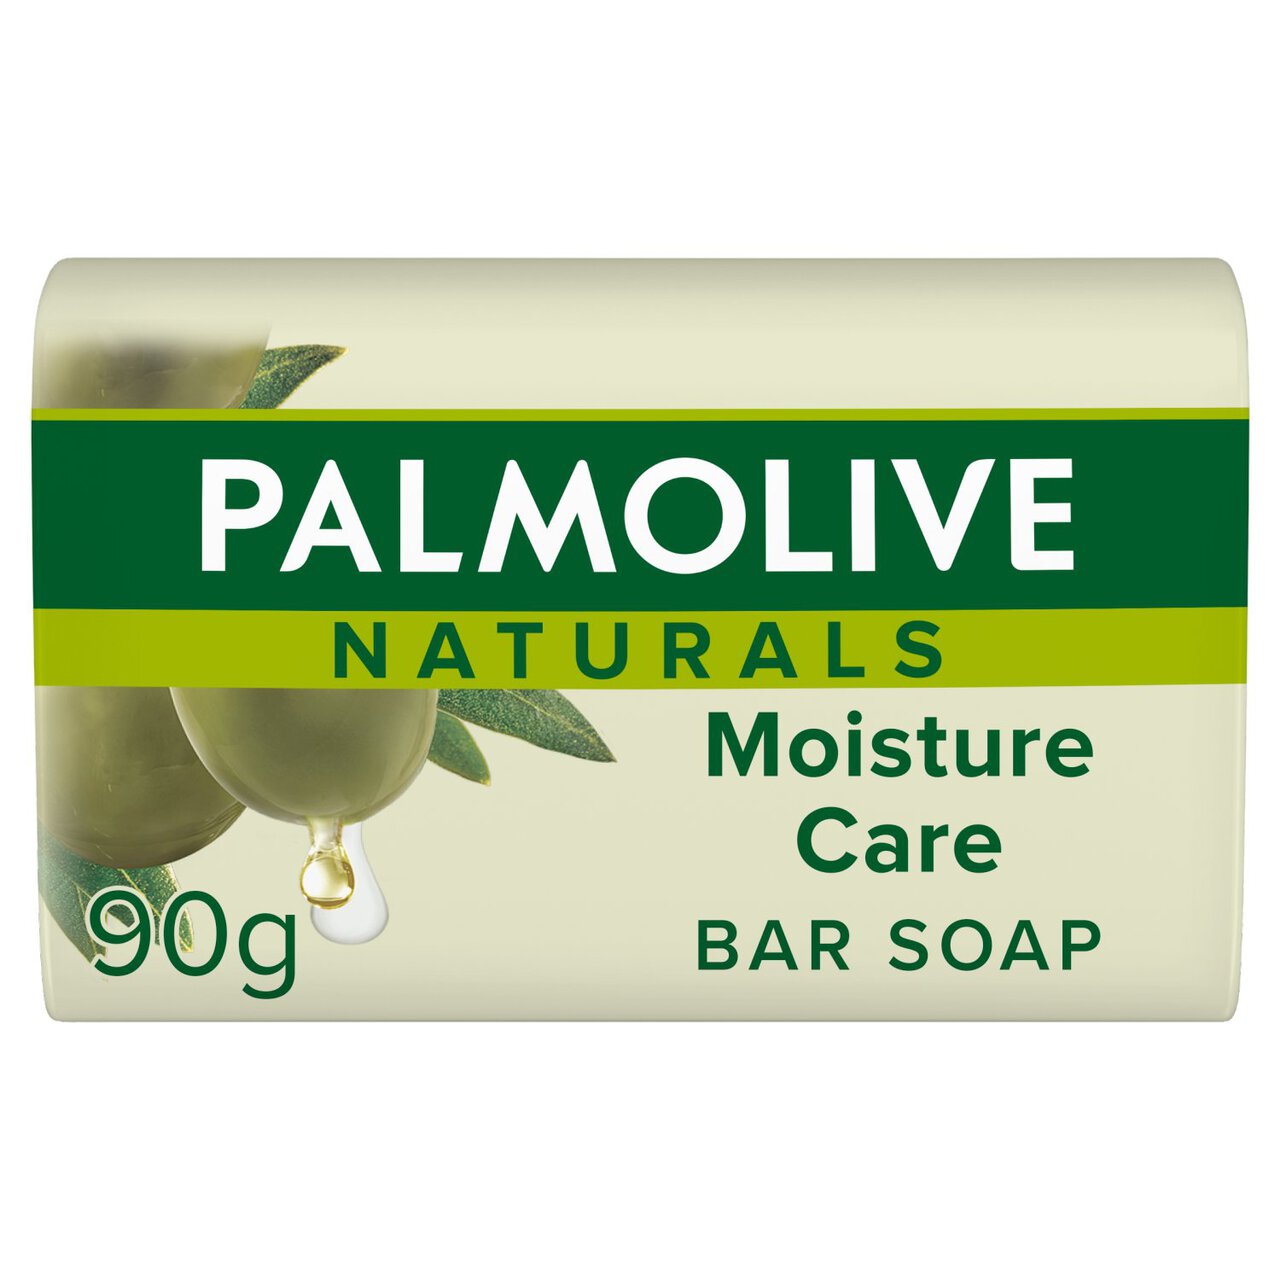 Palmolive Naturals Moisture with Olive Soap Bar 4 Pack 4 x 90g